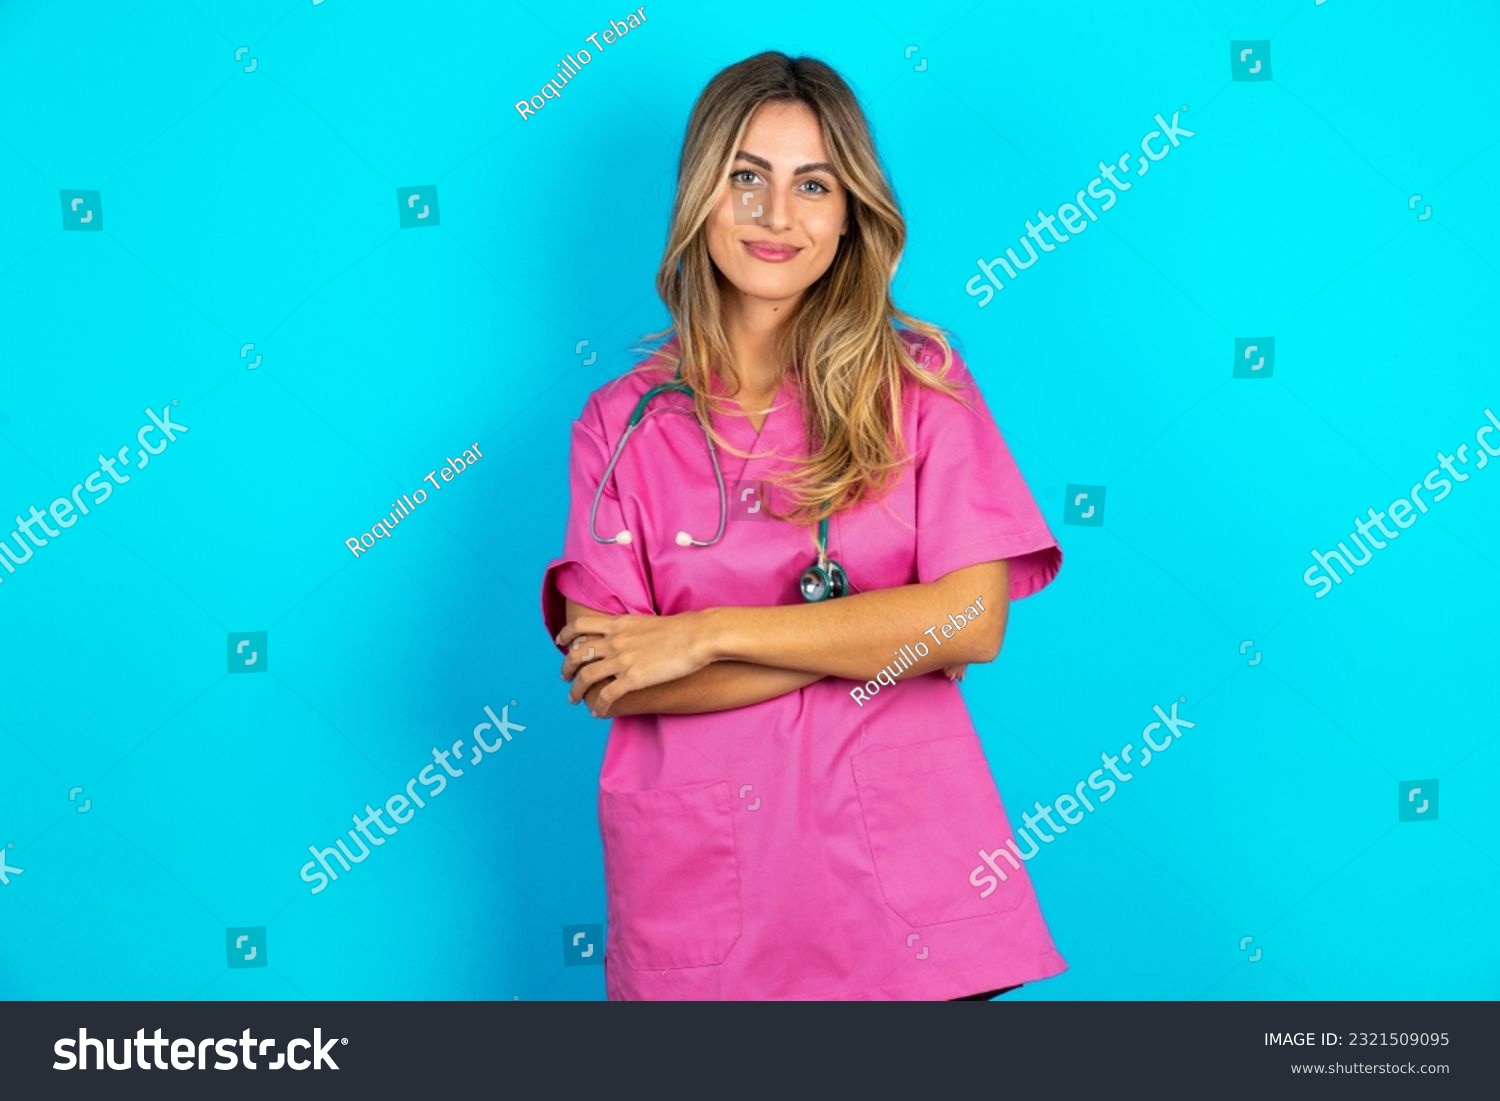 Self confident serious calm young beautiful doctor woman stands with arms folded. Shows professional vibe stands in assertive pose. #2321509095